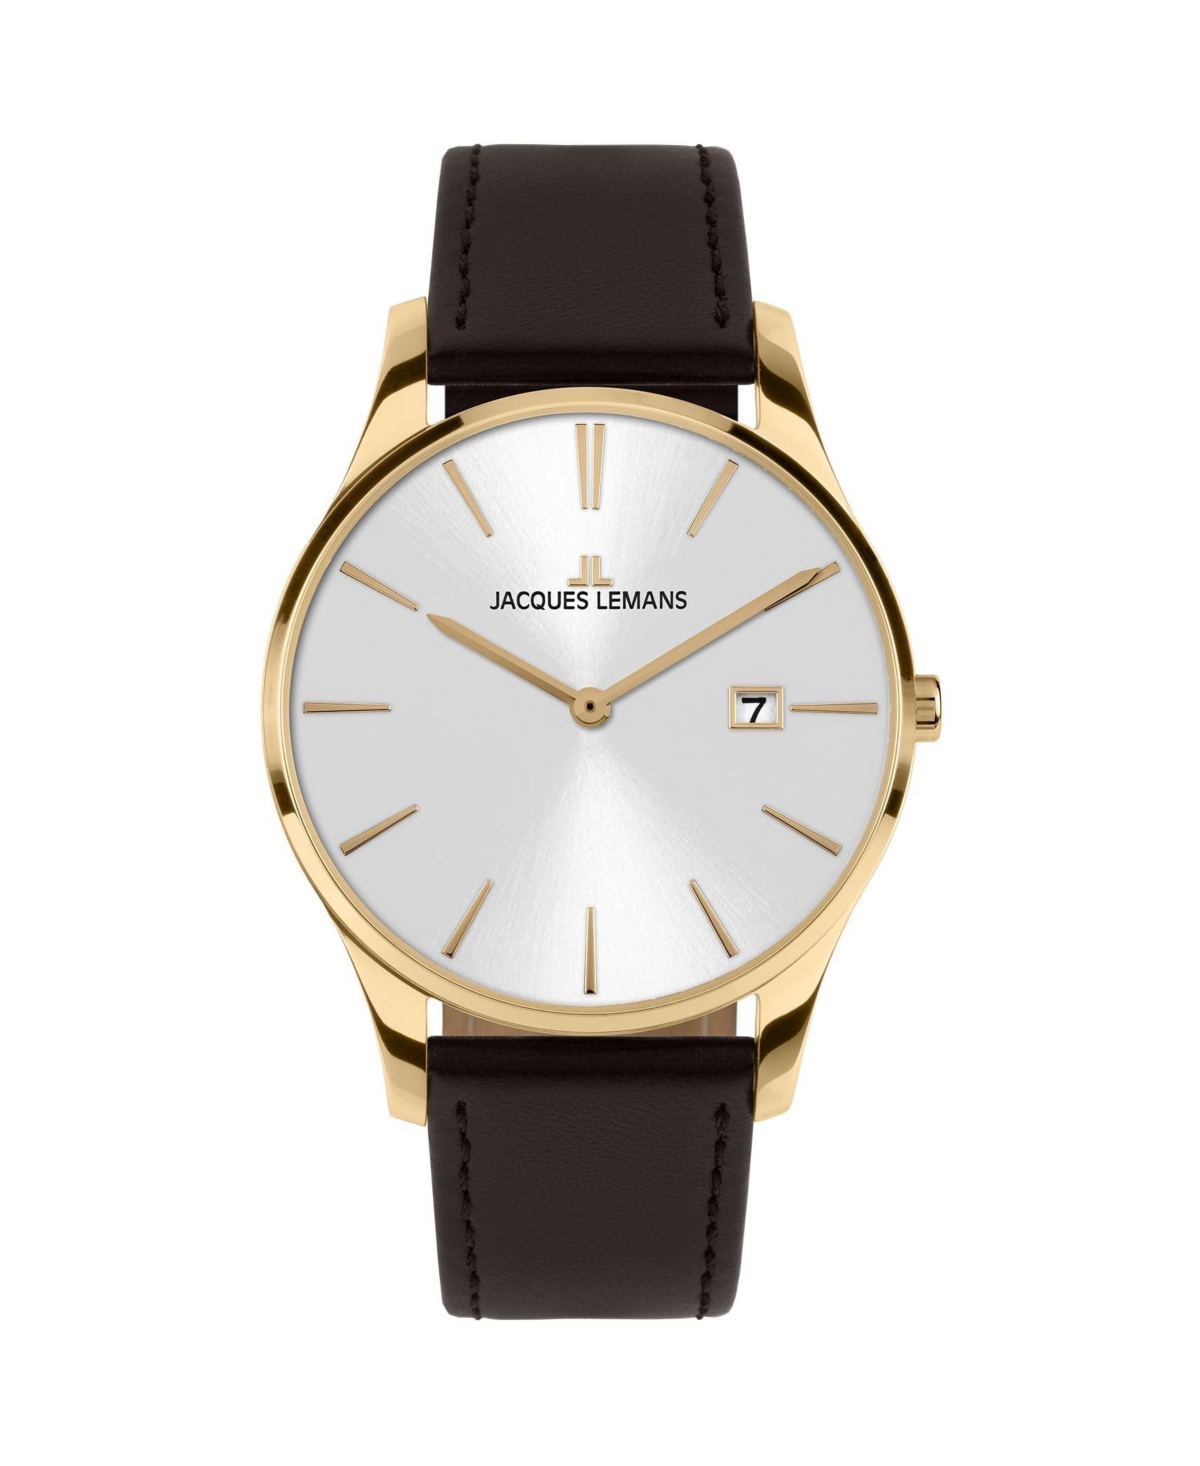 Women's London Watch with Leather Strap, Solid Stainless Steel Ip Gold, 1-2122 - White